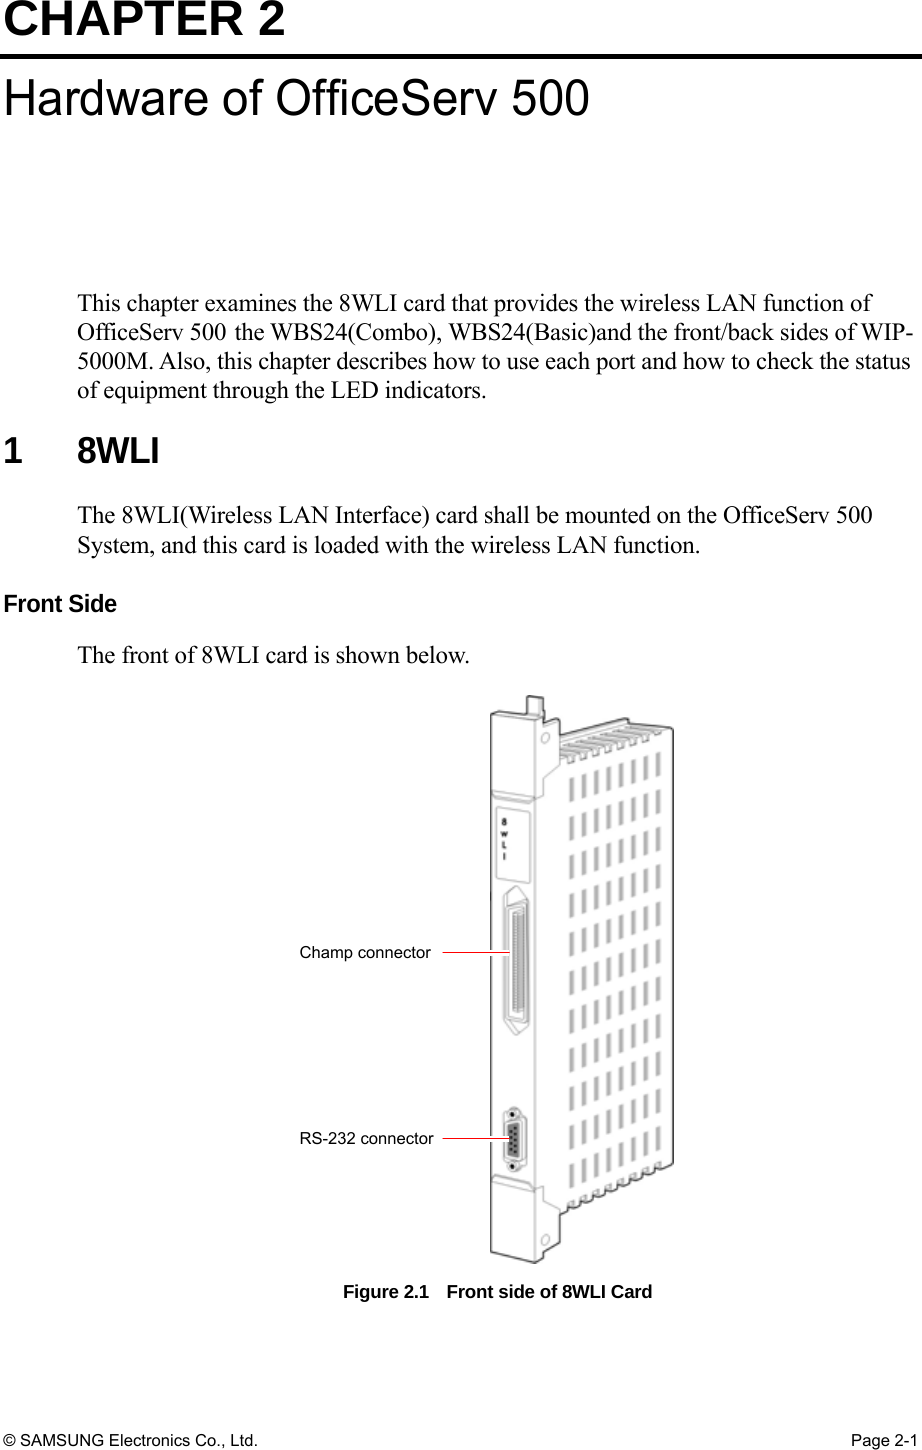 CHAPTER 2 © SAMSUNG Electronics Co., Ltd.  Page 2-1 Hardware of OfficeServ 500 This chapter examines the 8WLI card that provides the wireless LAN function of OfficeServ 500 the WBS24(Combo), WBS24(Basic)and the front/back sides of WIP-5000M. Also, this chapter describes how to use each port and how to check the status of equipment through the LED indicators.  1 8WLI The 8WLI(Wireless LAN Interface) card shall be mounted on the OfficeServ 500 System, and this card is loaded with the wireless LAN function.  Front Side The front of 8WLI card is shown below. Figure 2.1    Front side of 8WLI Card  Champ connectorRS-232 connector